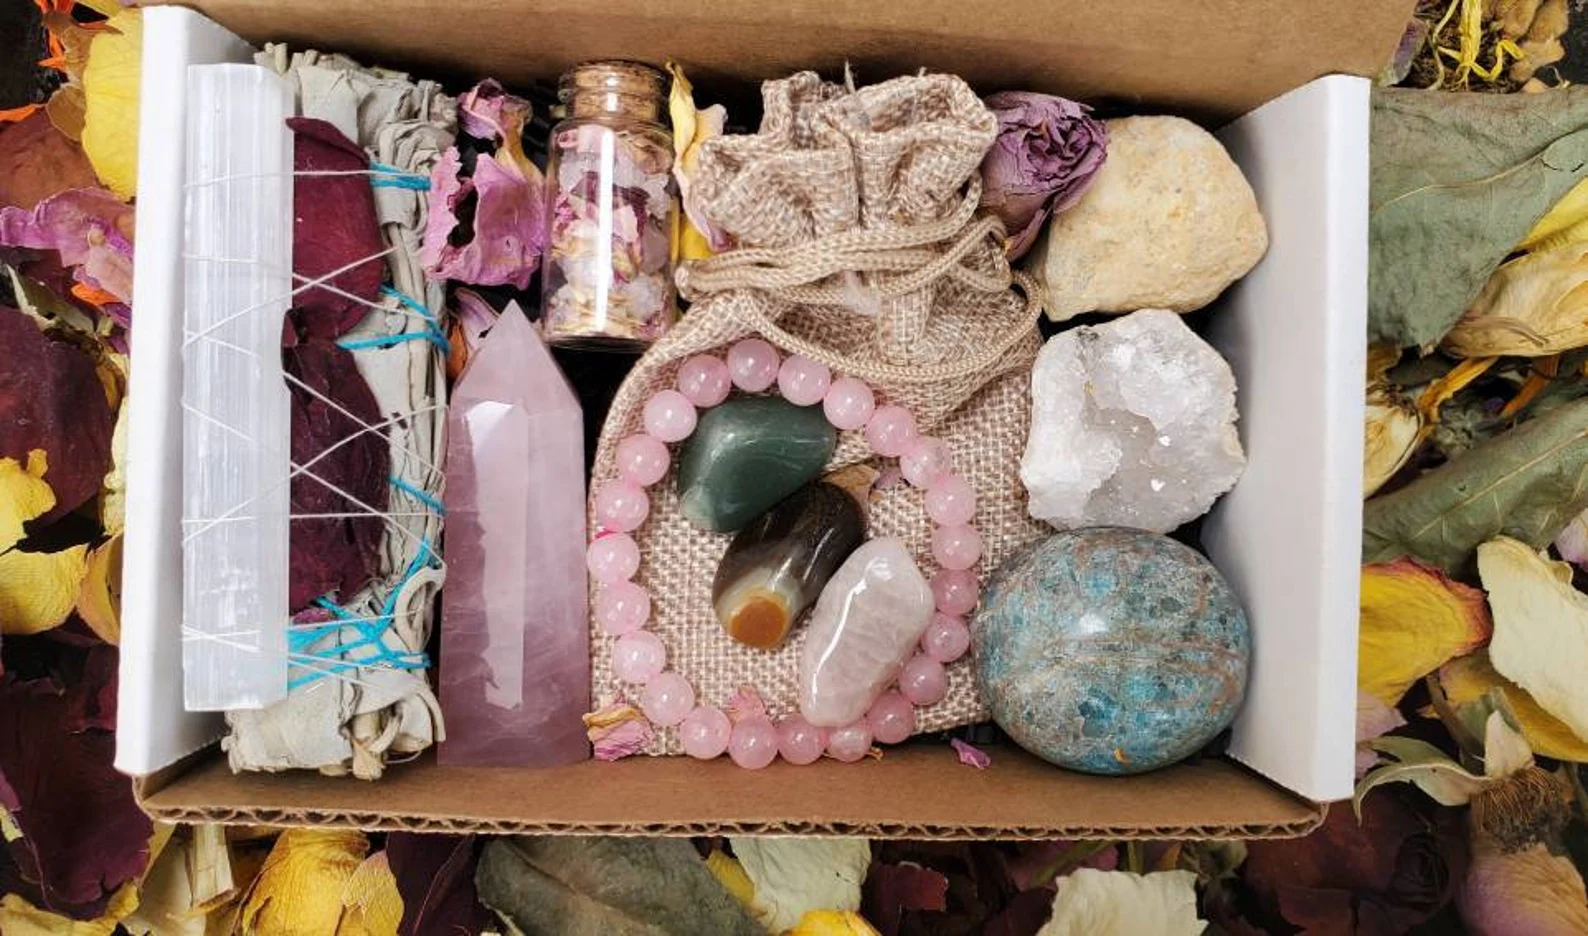 Crystal gift box makes the perfect spiritual gift for a loved one